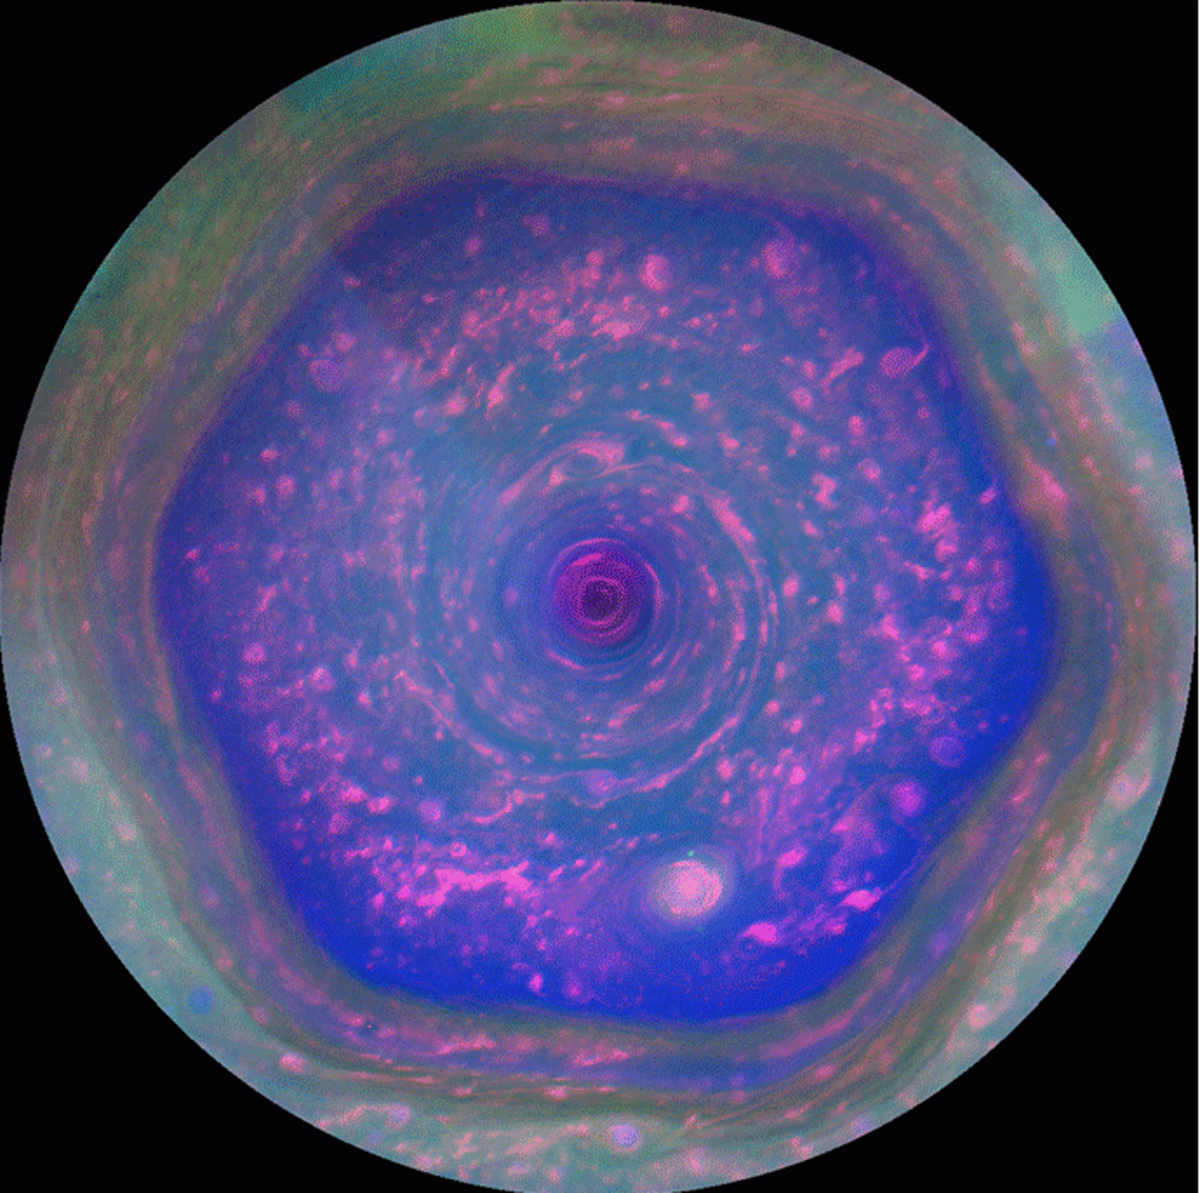 False color image of Saturn's north pole from 2013.